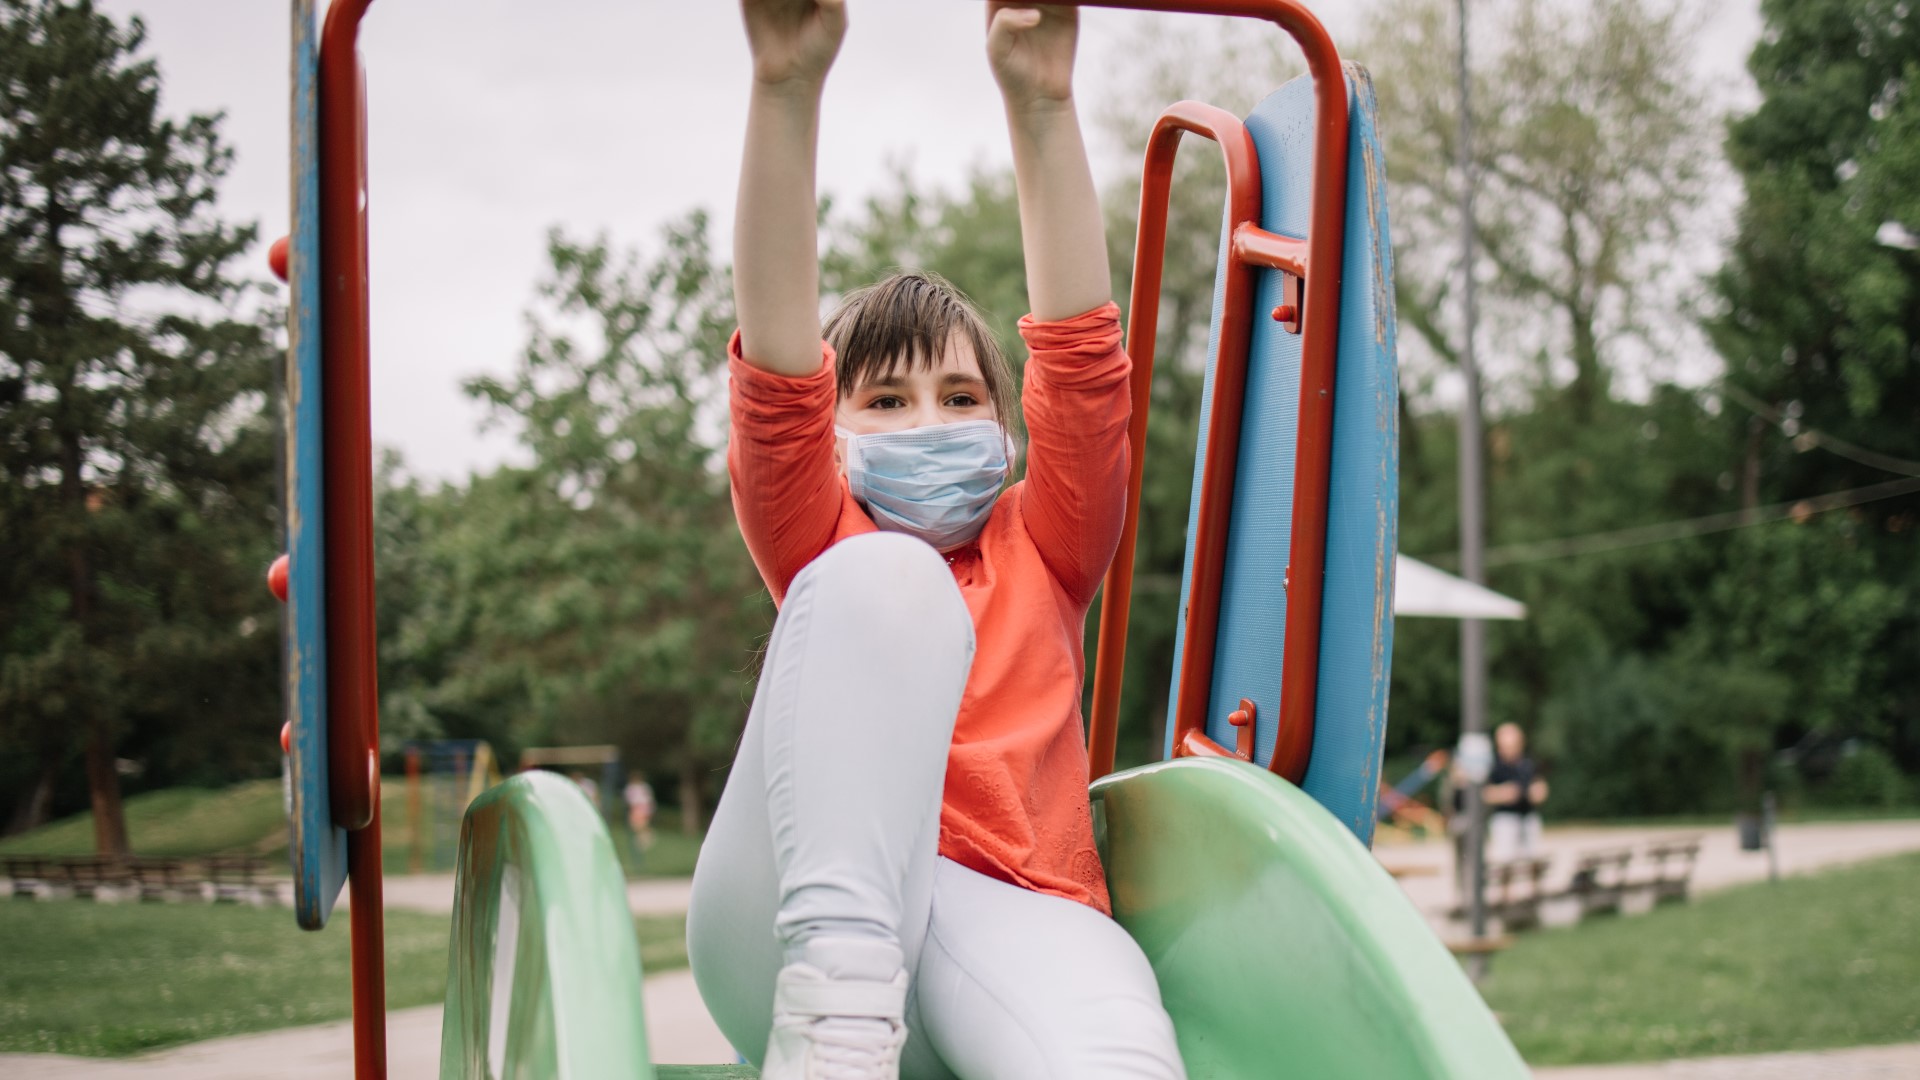 A pediatric infectious disease doctor at Helen DeVos Children's Hospital gives recommendations on fit and use, as well as challenges wearing face masks for kids.